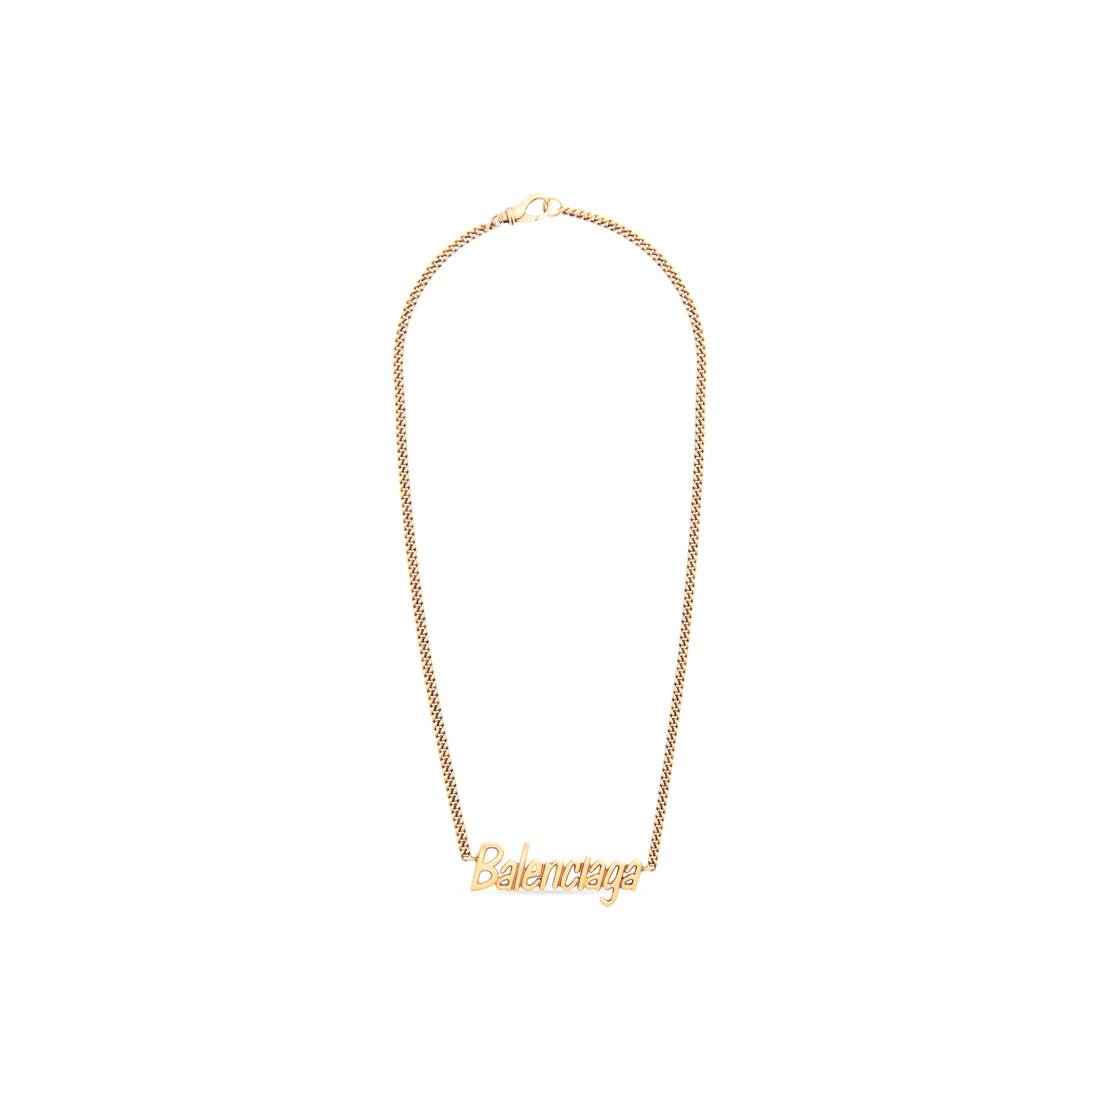 Women's Typo Necklace in Gold